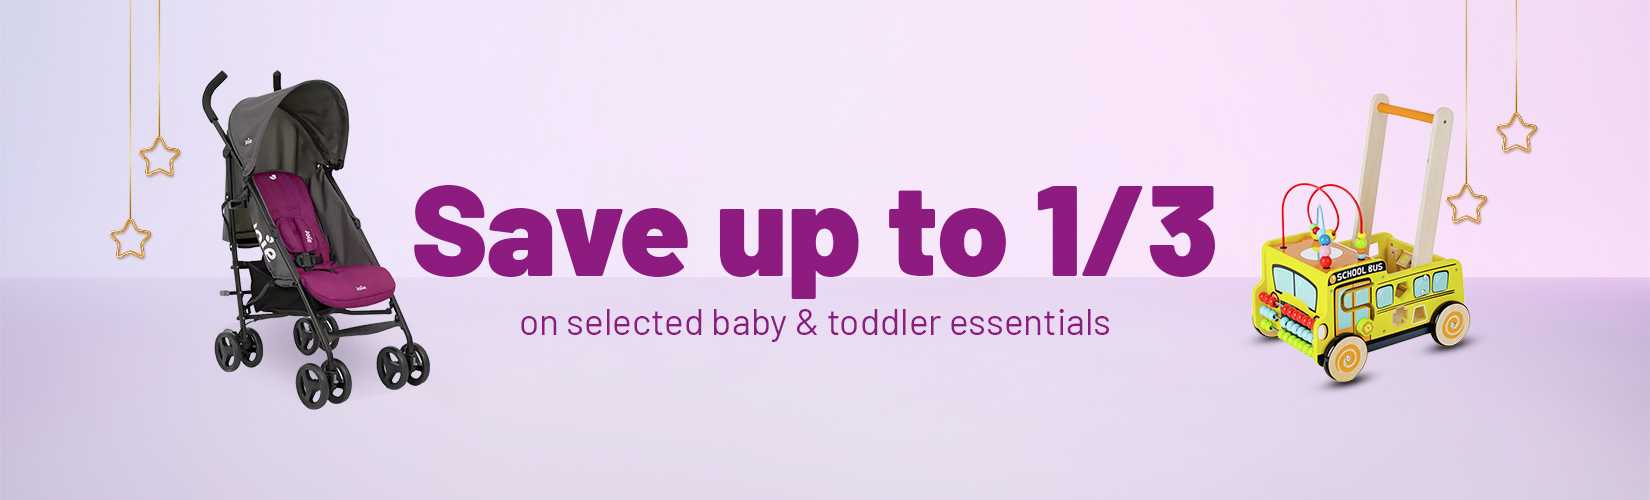 Save up to 1/3 on selected baby & toddler essentials.